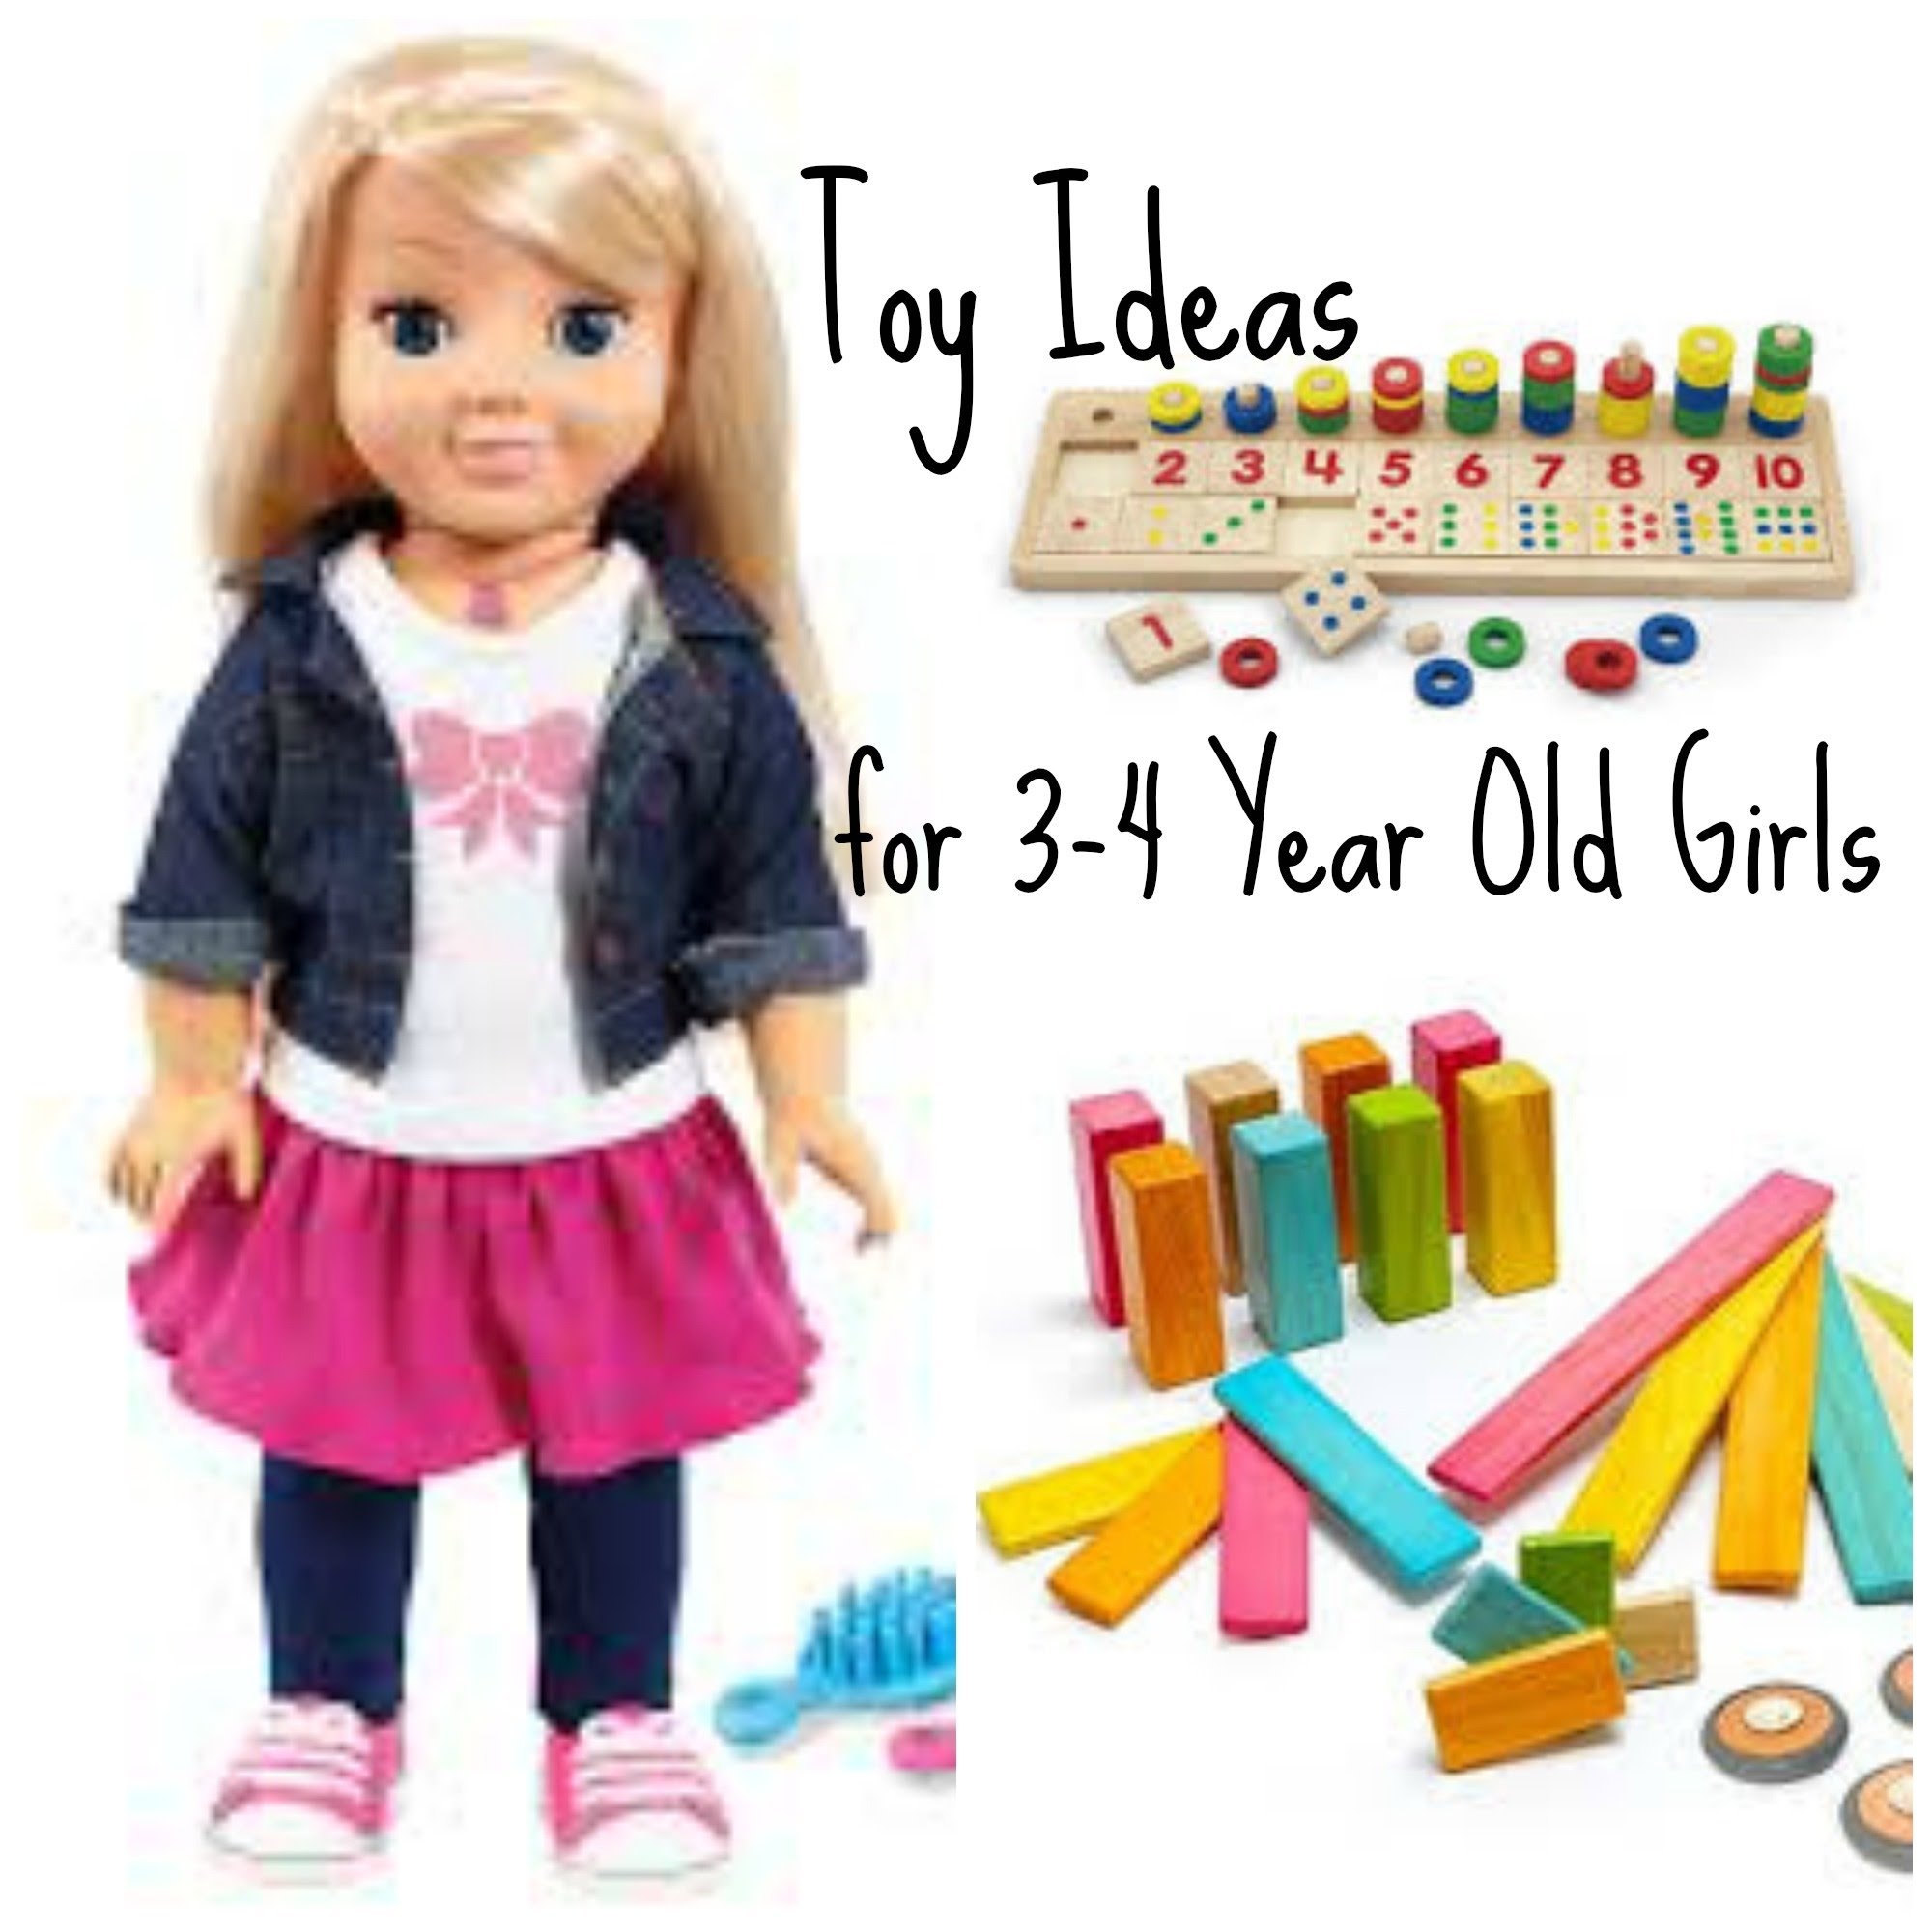 10 Spectacular Gift Ideas For 3 Yr Old Girl toys 3 4 years old girl all i want for christmas collab youtube 4 2022